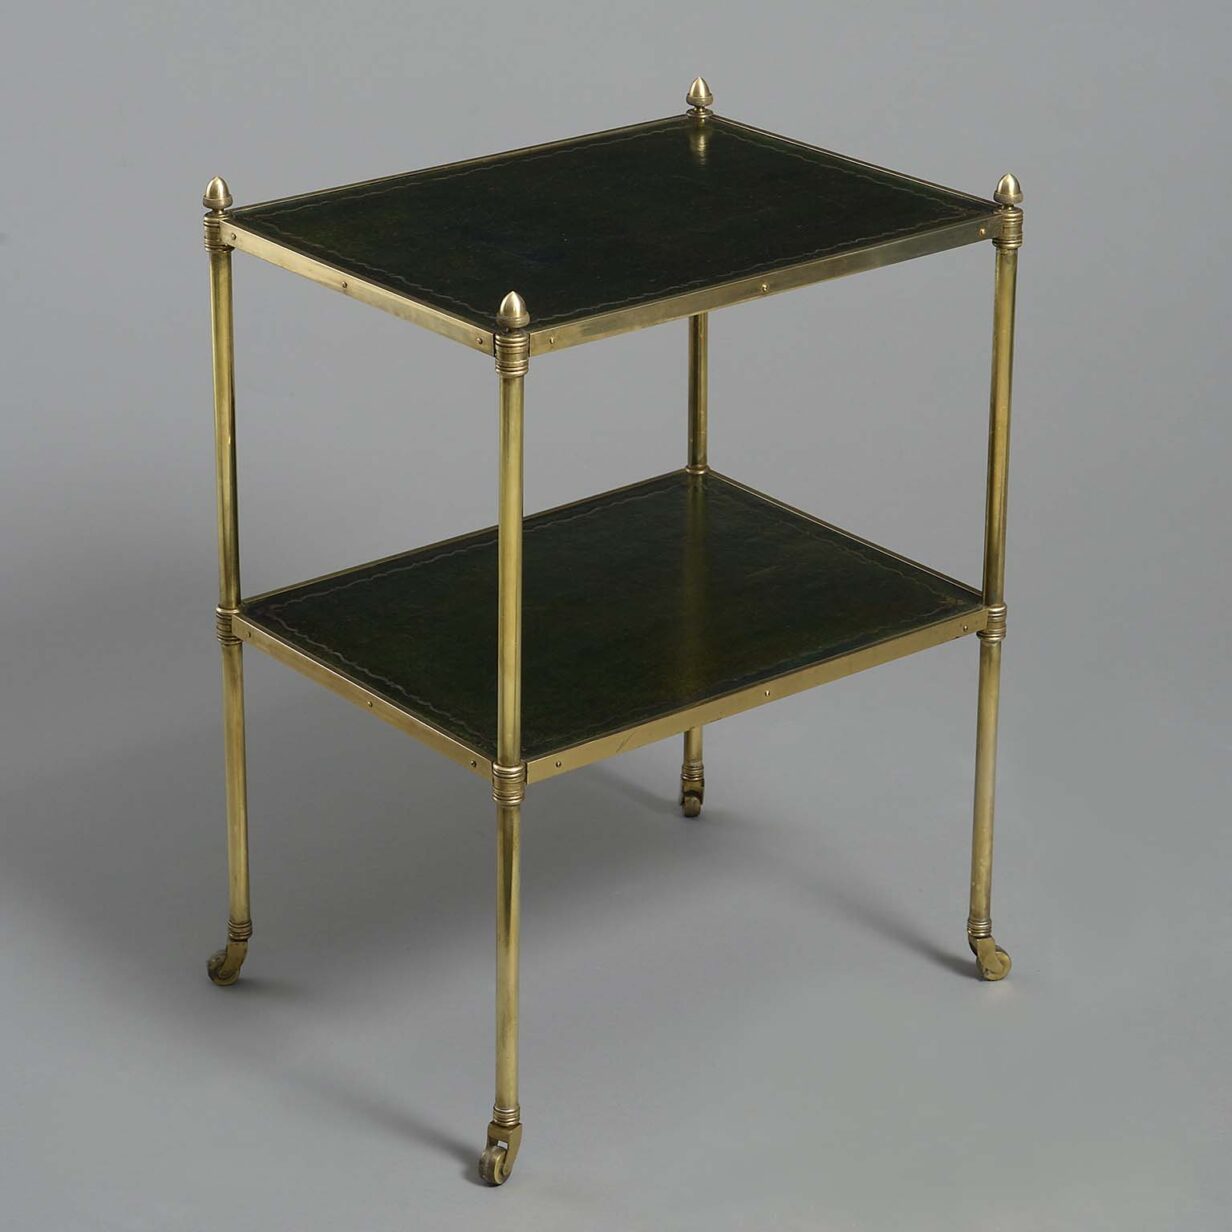 Mid-20th century two tier table